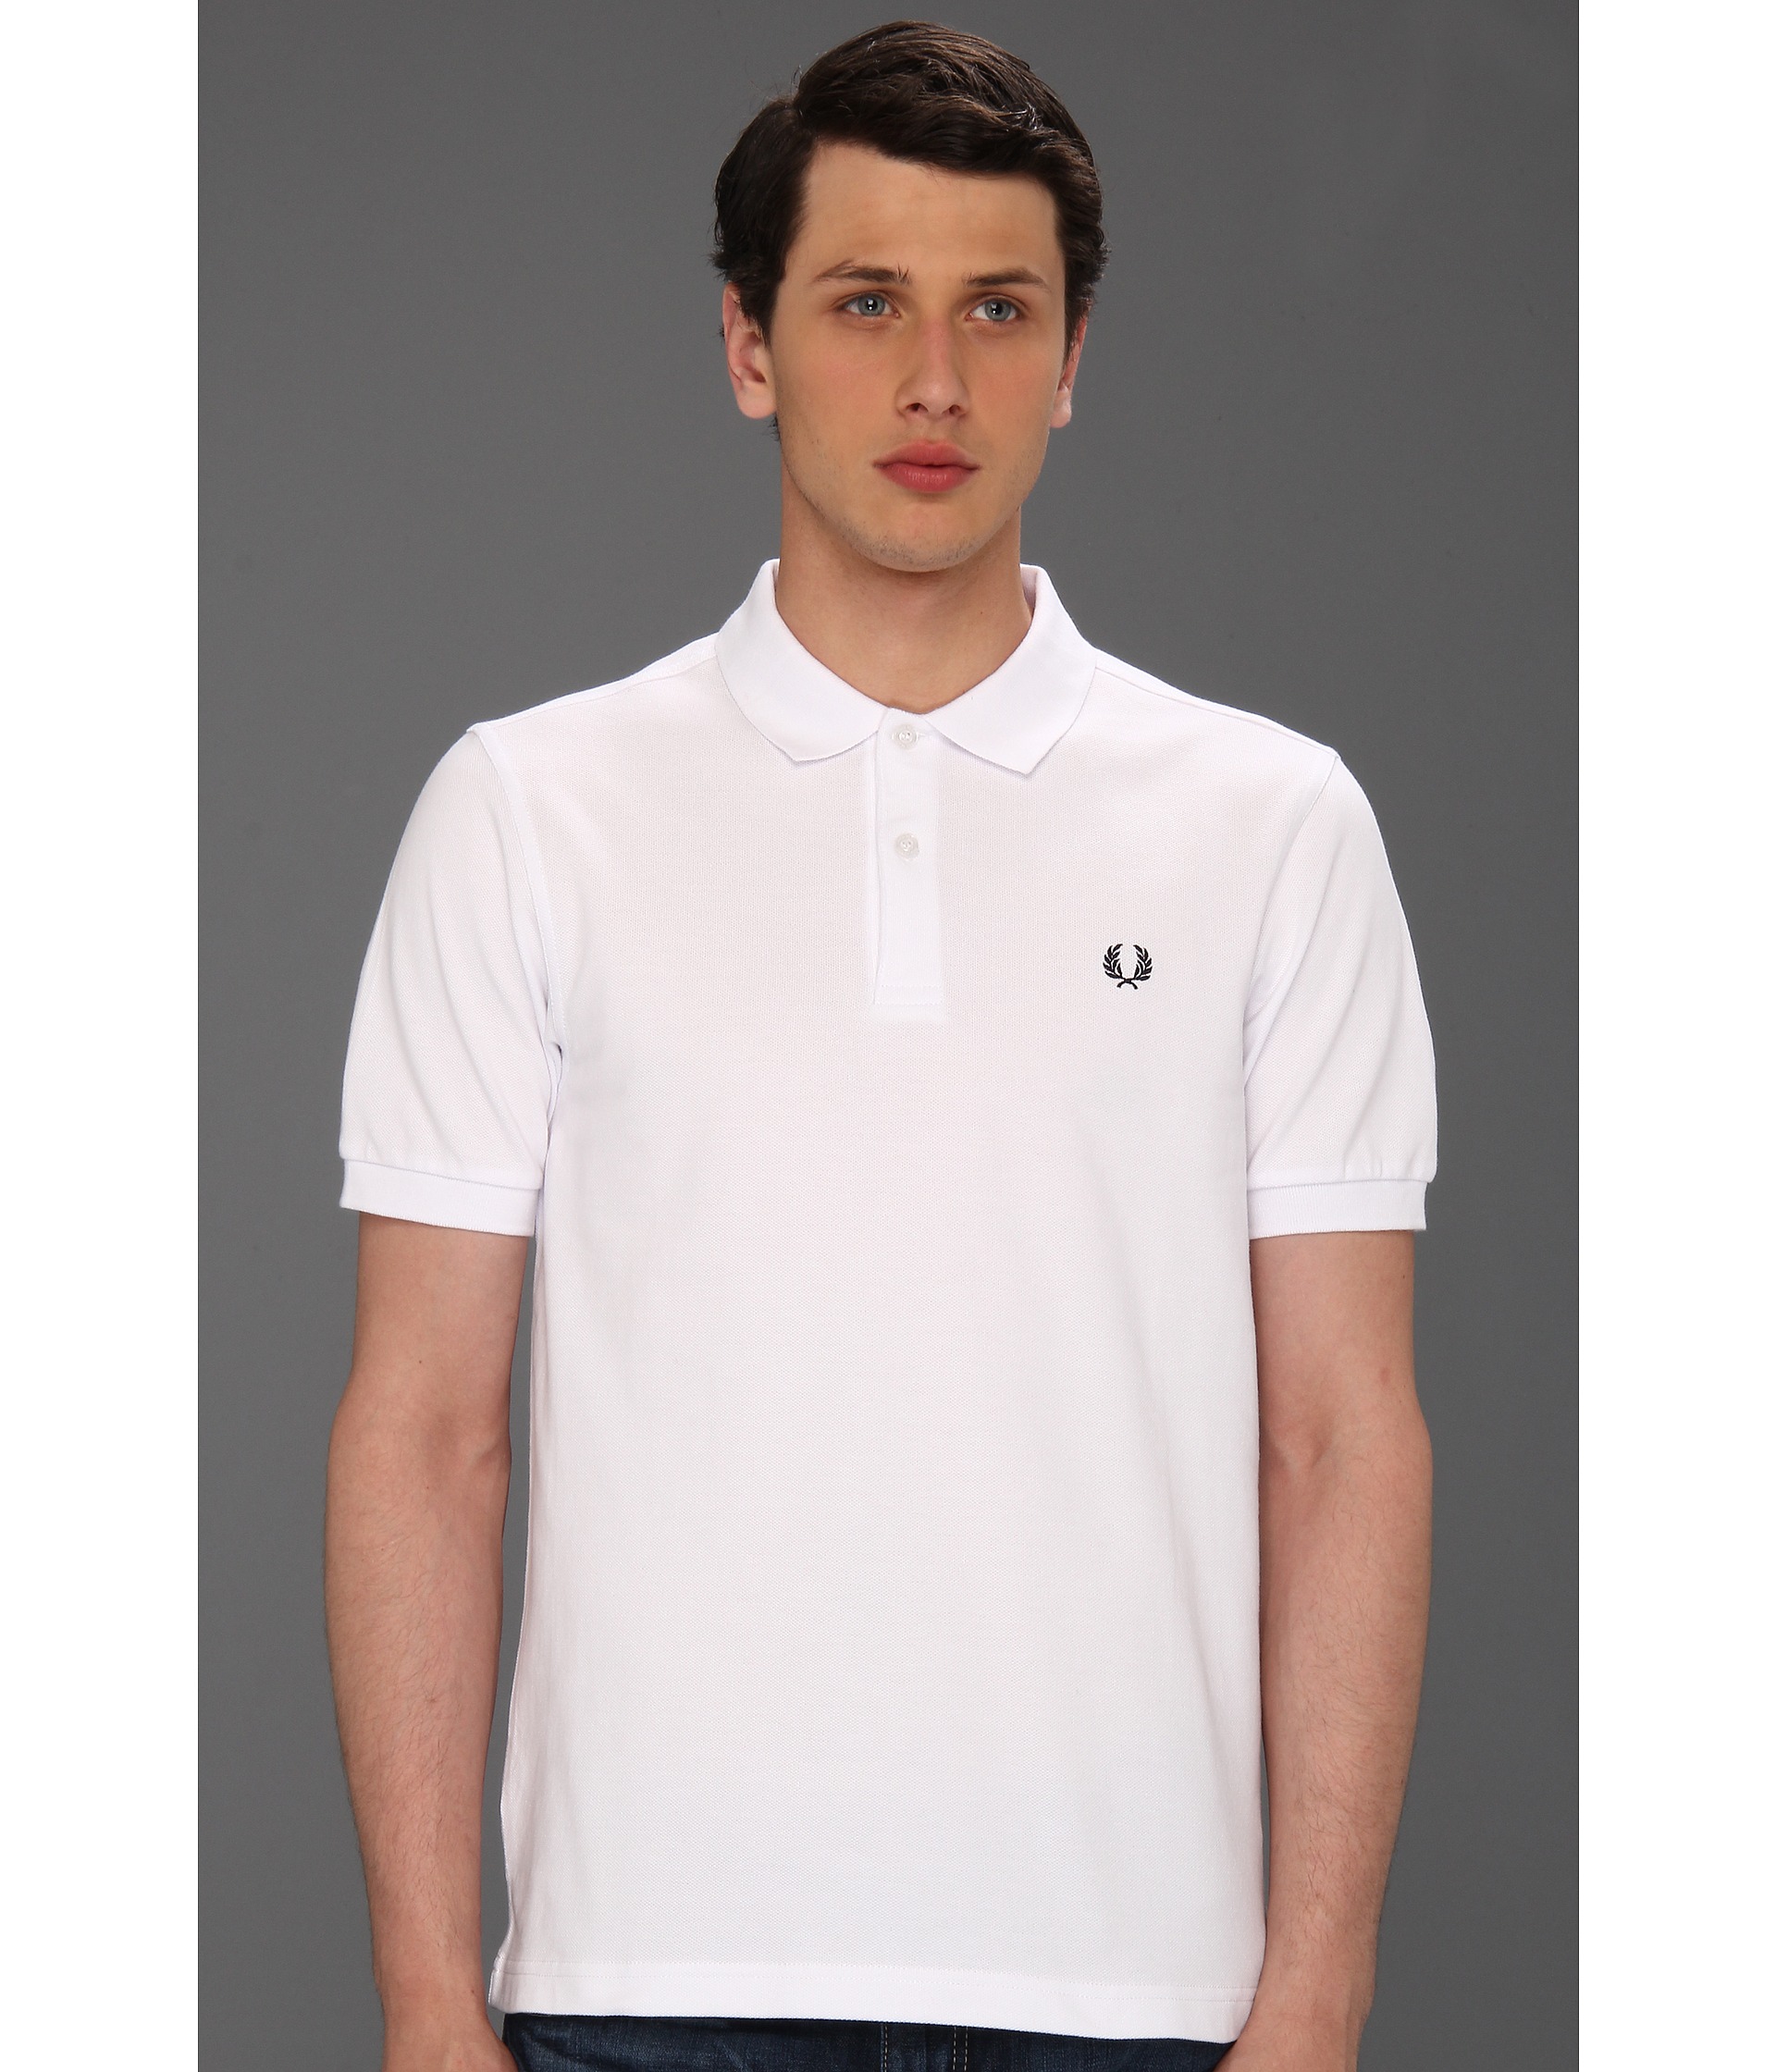   68.00  Fred Perry Slim Fit Solid Plain Polo $68.00